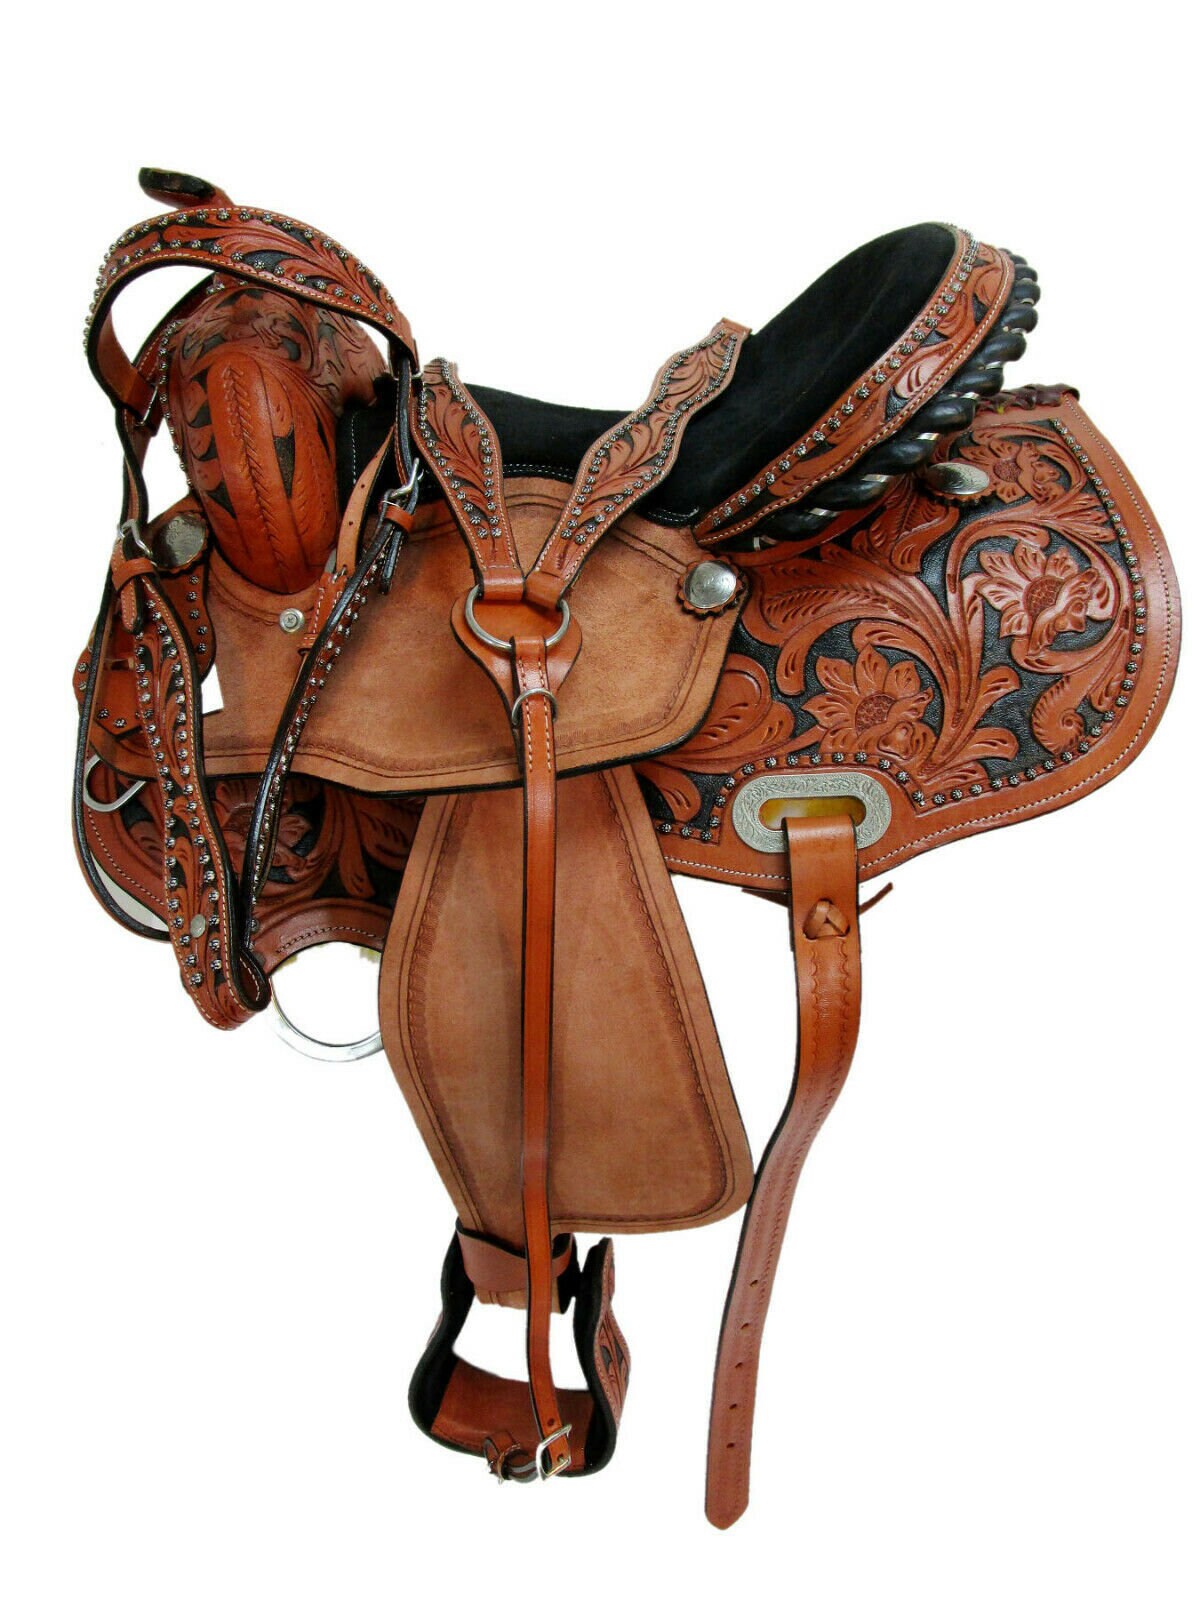 AceRugs Silver Show Horse Saddle Western Synthetic Pleasure Trail Texas Star Parade TACK Set Headstall Resin Breastplate 